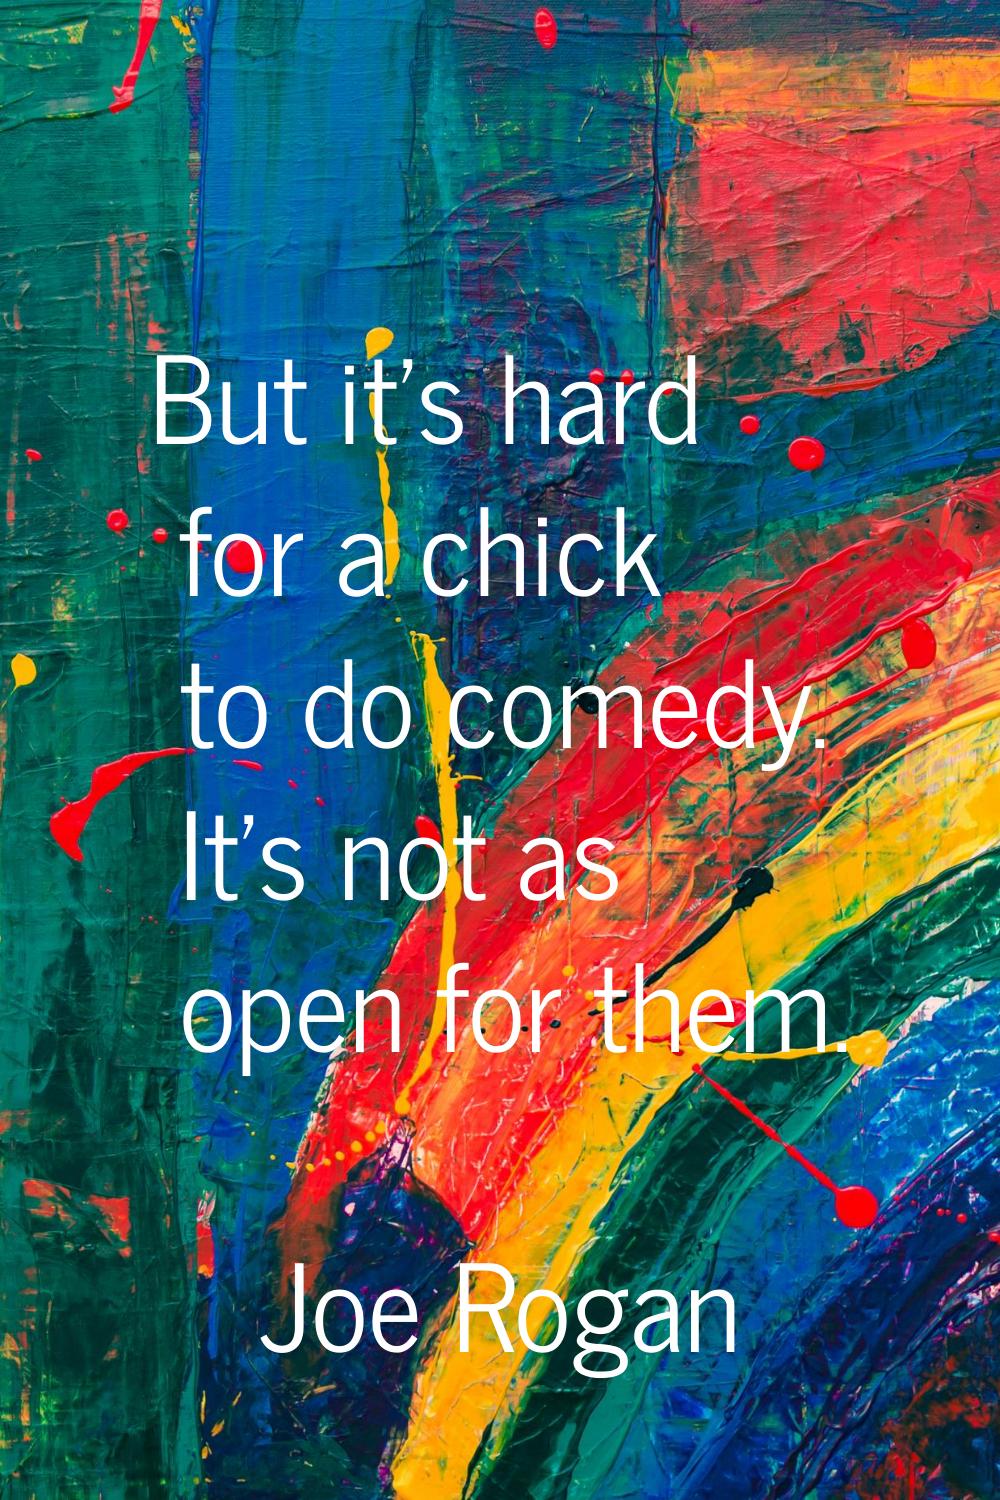 But it's hard for a chick to do comedy. It's not as open for them.